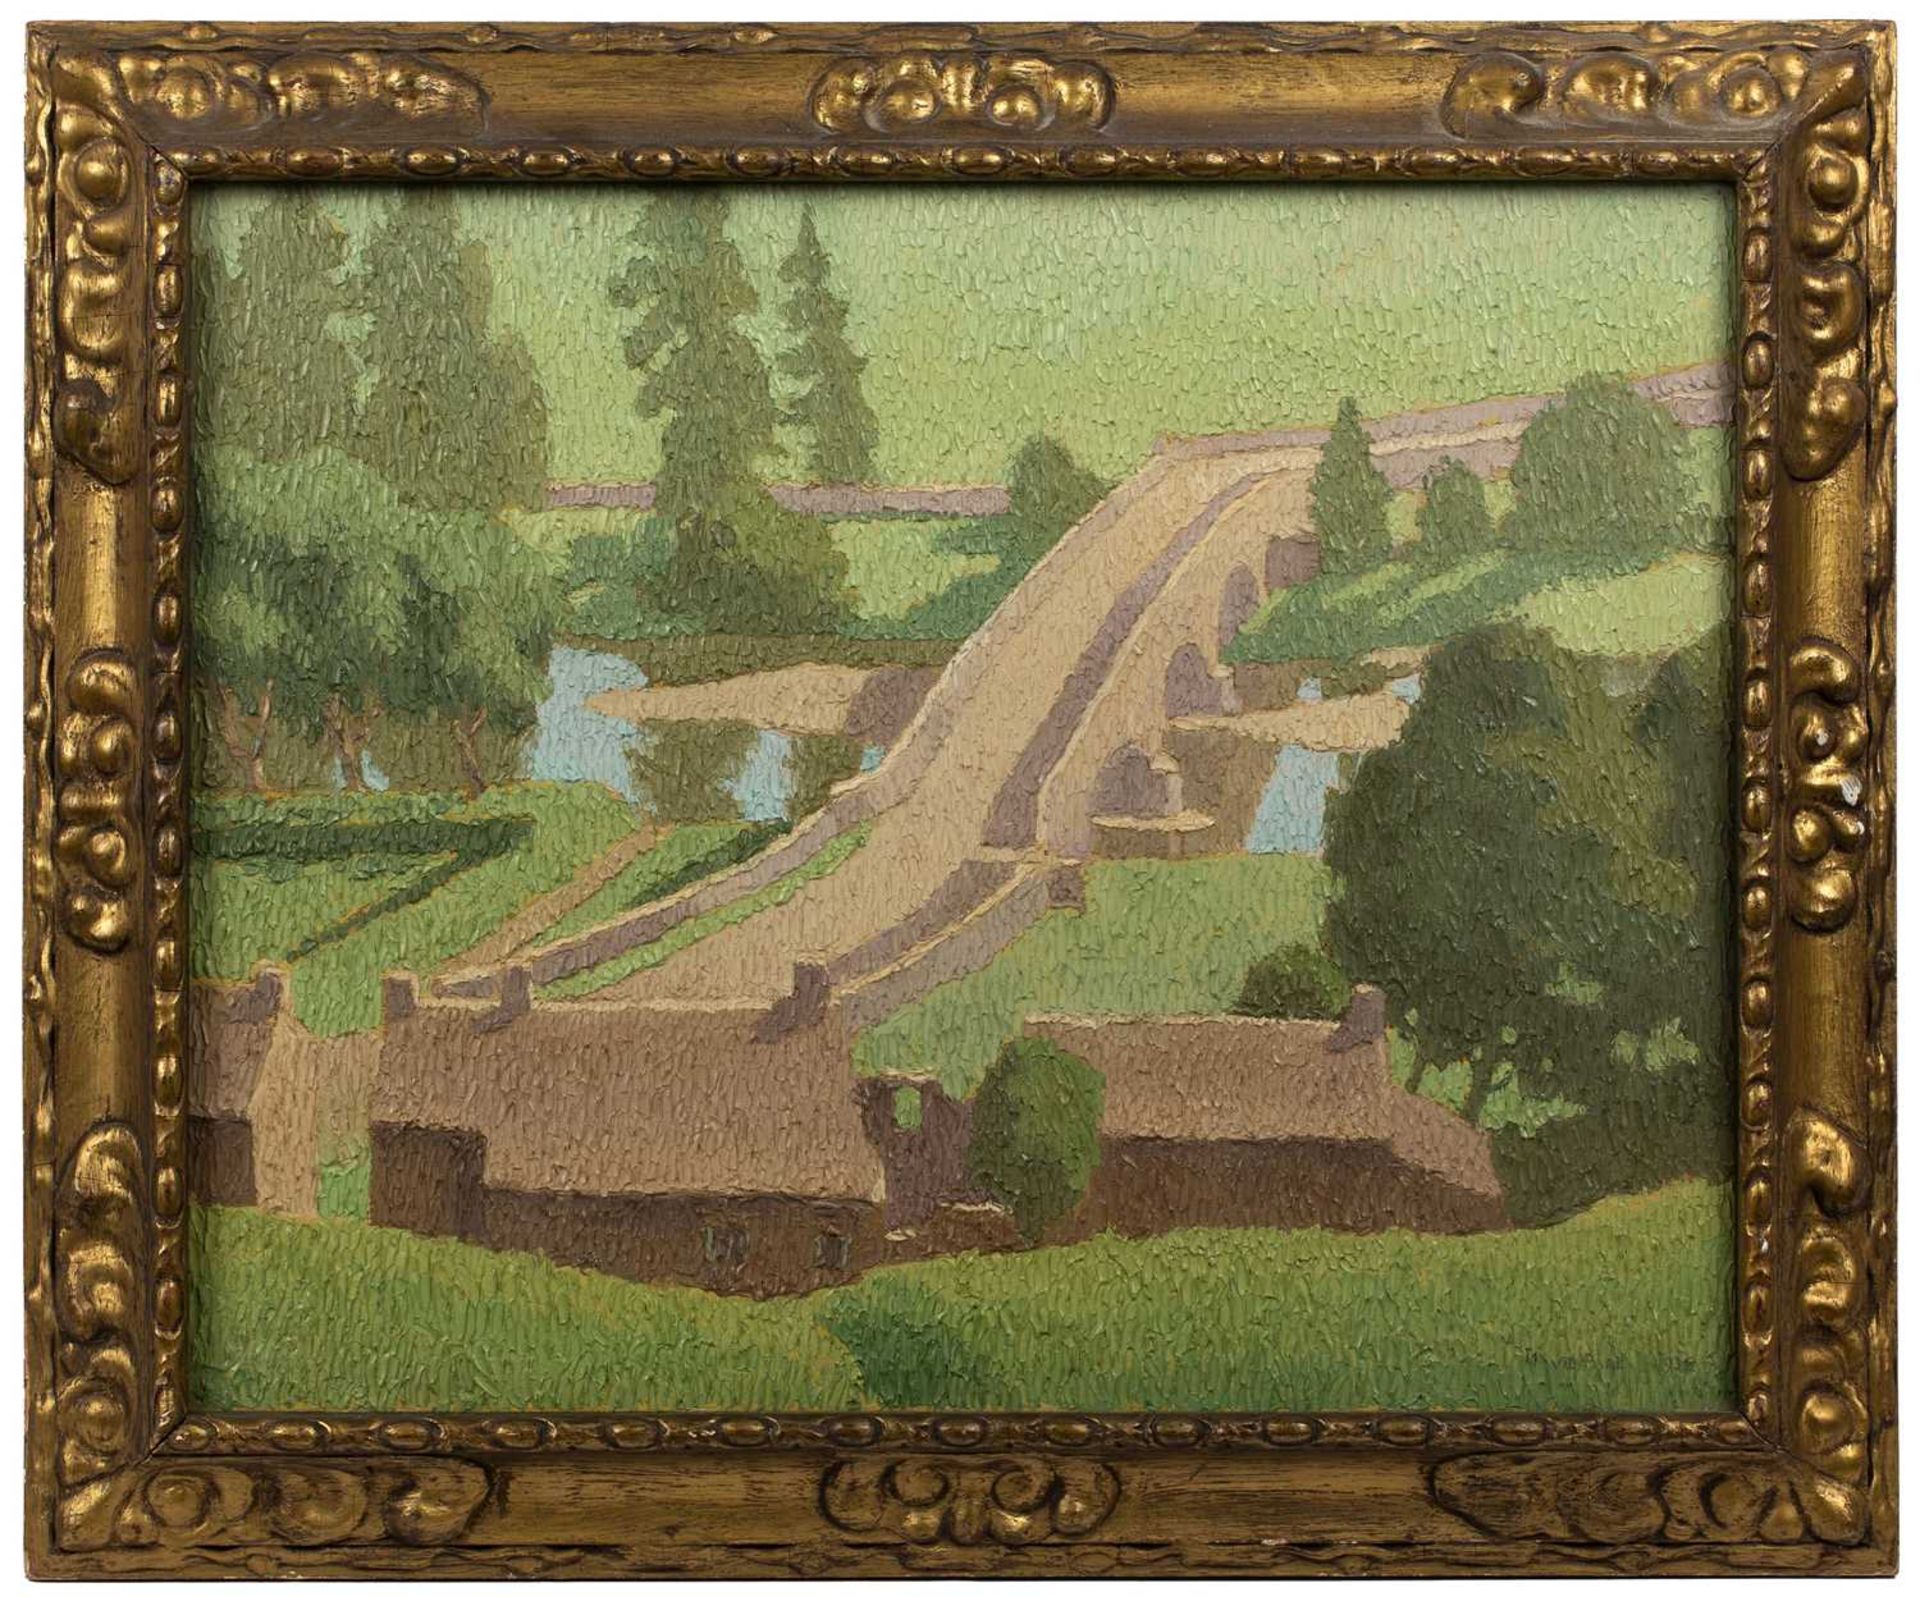 David Pare (1911-1996) Isle's Bridge, Swaledale, Yorkshire, 1935 signed and dated (lower right) - Image 2 of 5